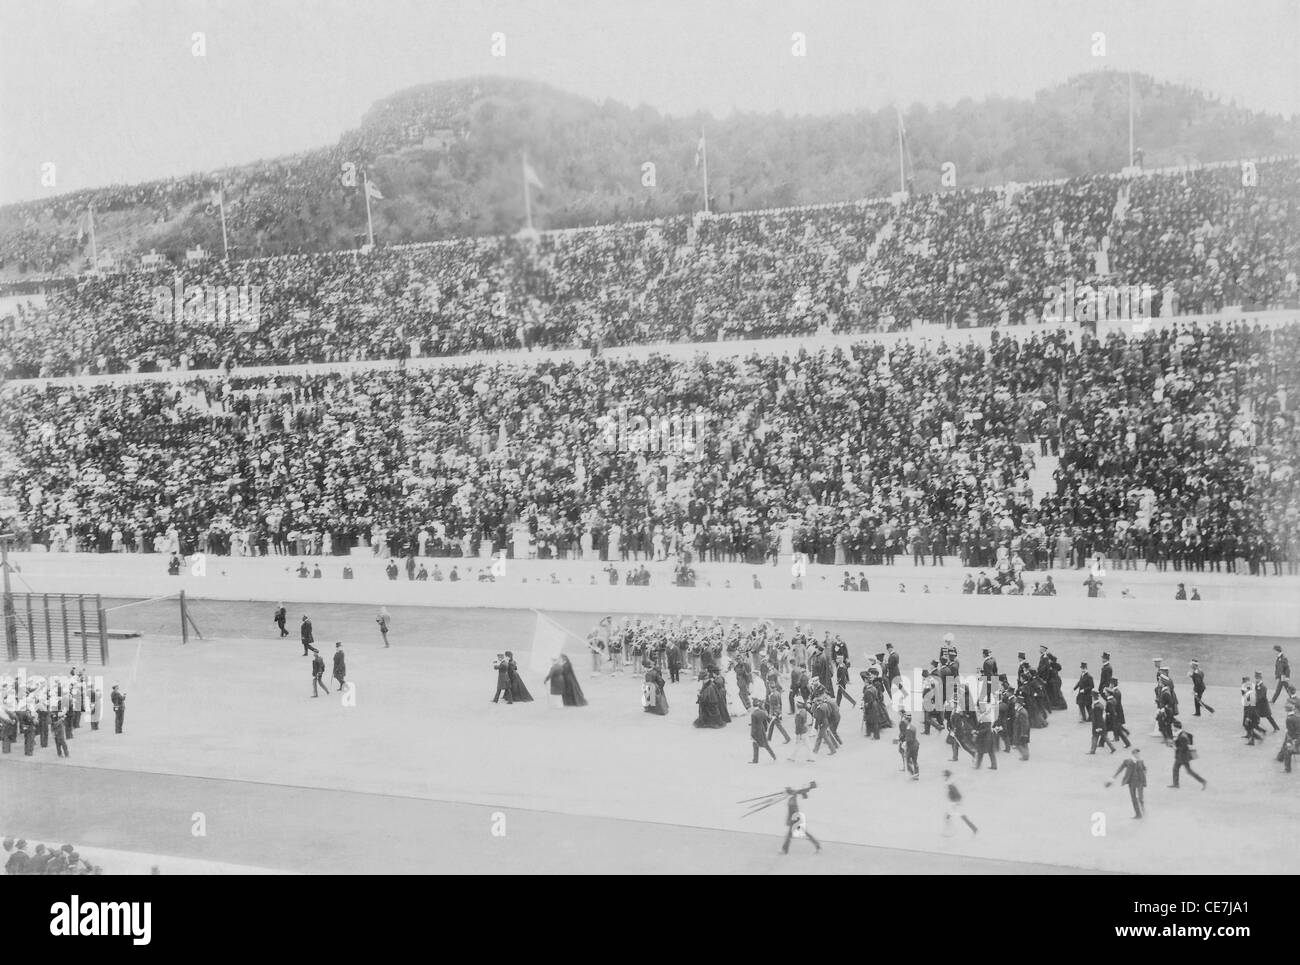 Greece, Attica, Athens, Opening ceremony of the 1896 Games of the I Olympiad in the Panathinaiko stadium, royal party arrival. Stock Photo